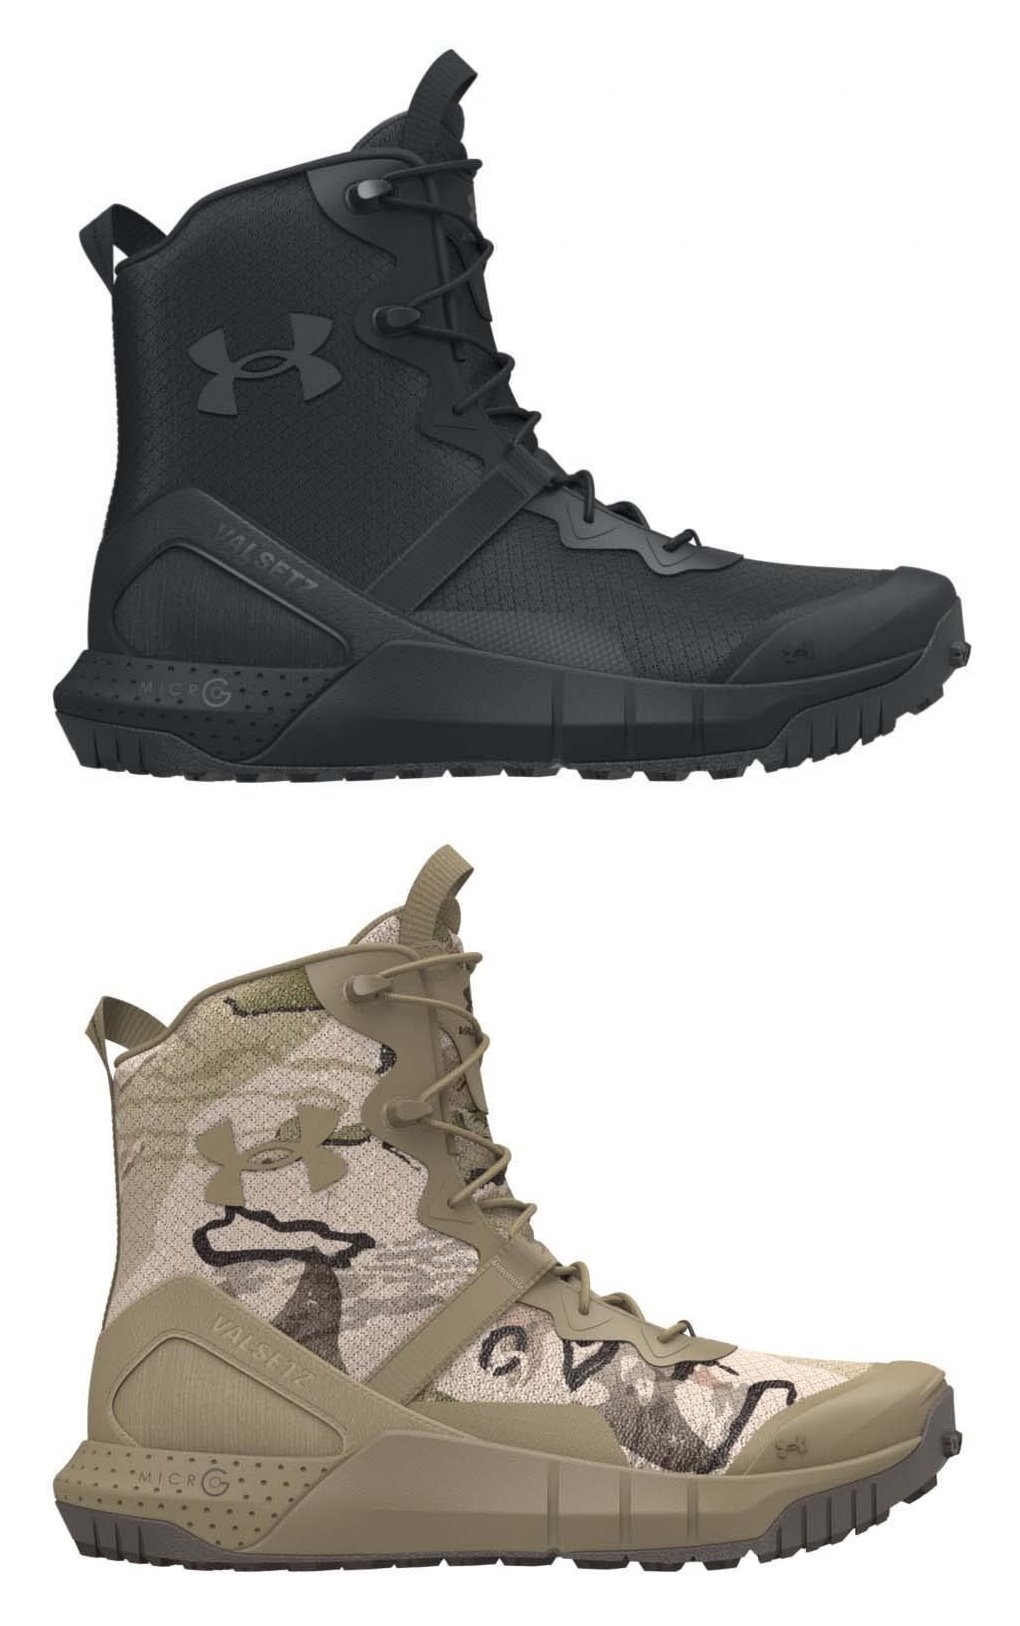 Under Armour Mens Boots in Mens Boots 